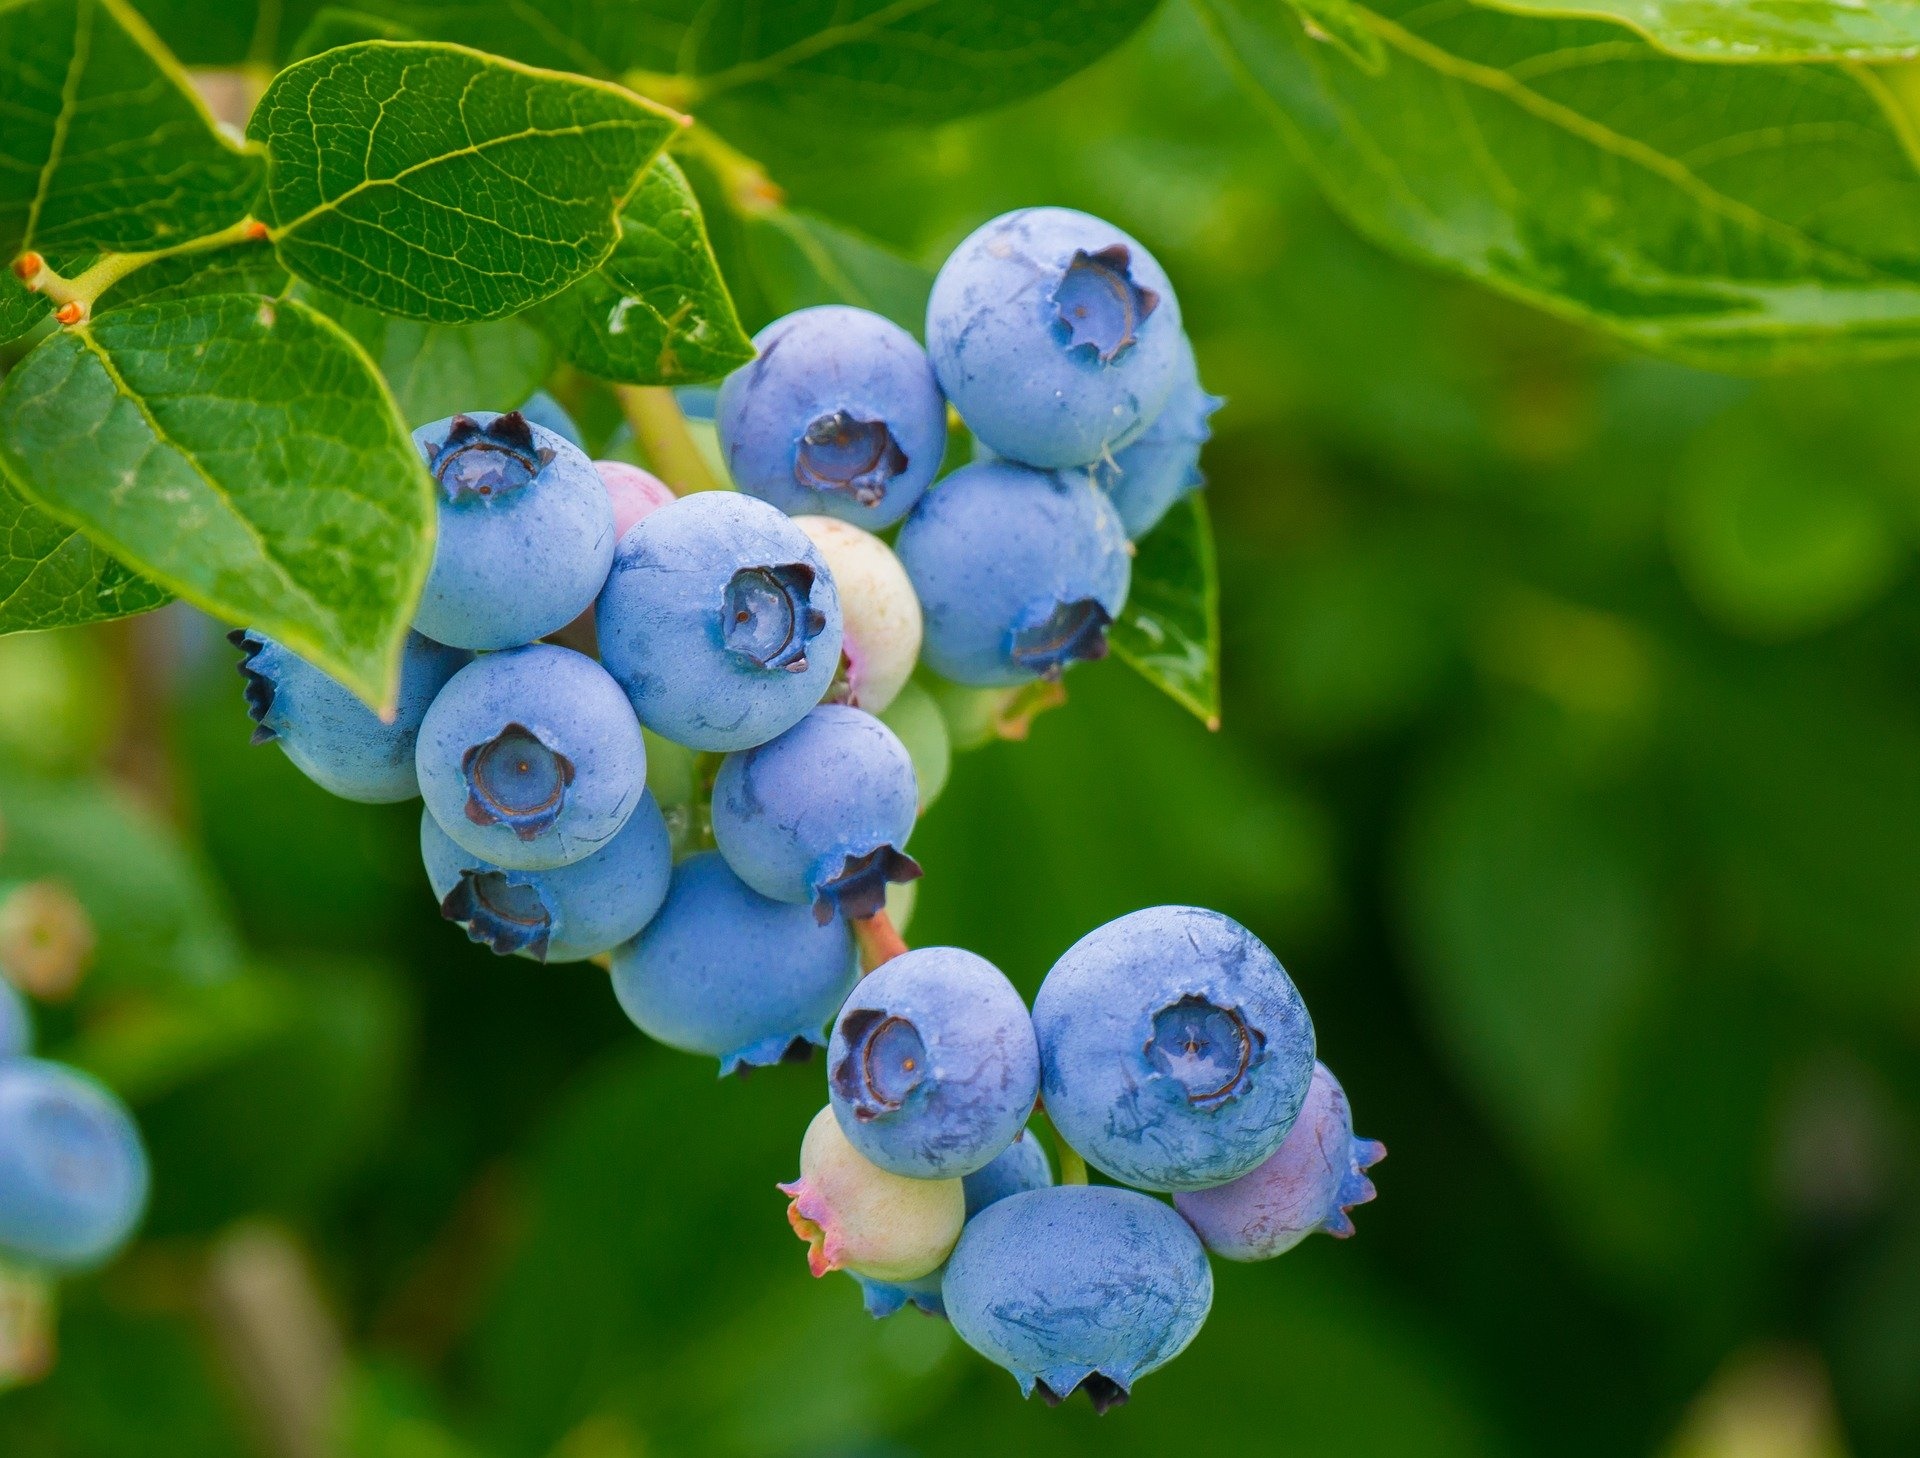 A close-up of a clump of blueberries on a bush.